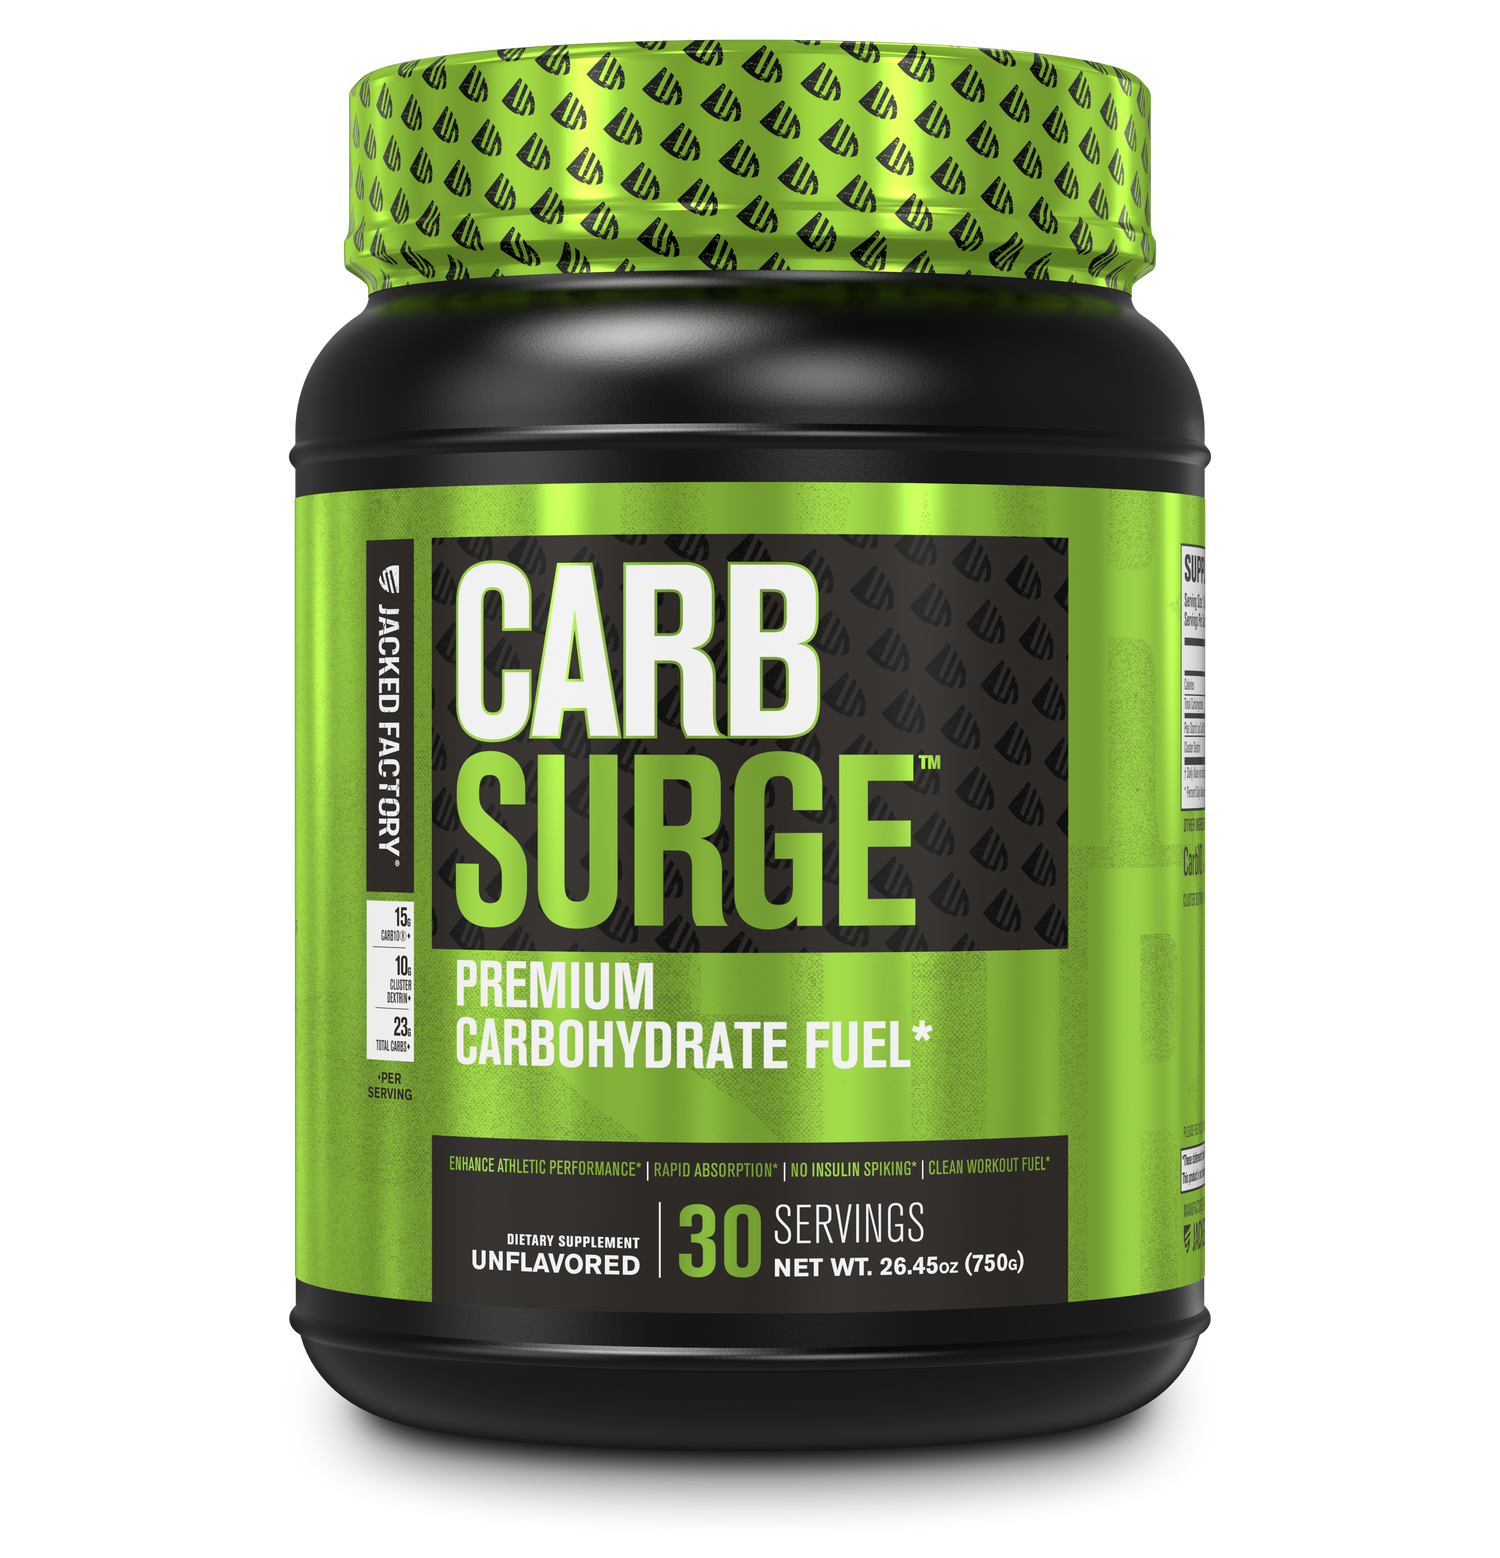 Jacked Factory's Carb Surge Unflavored (30 servings) in a black bottle with green label